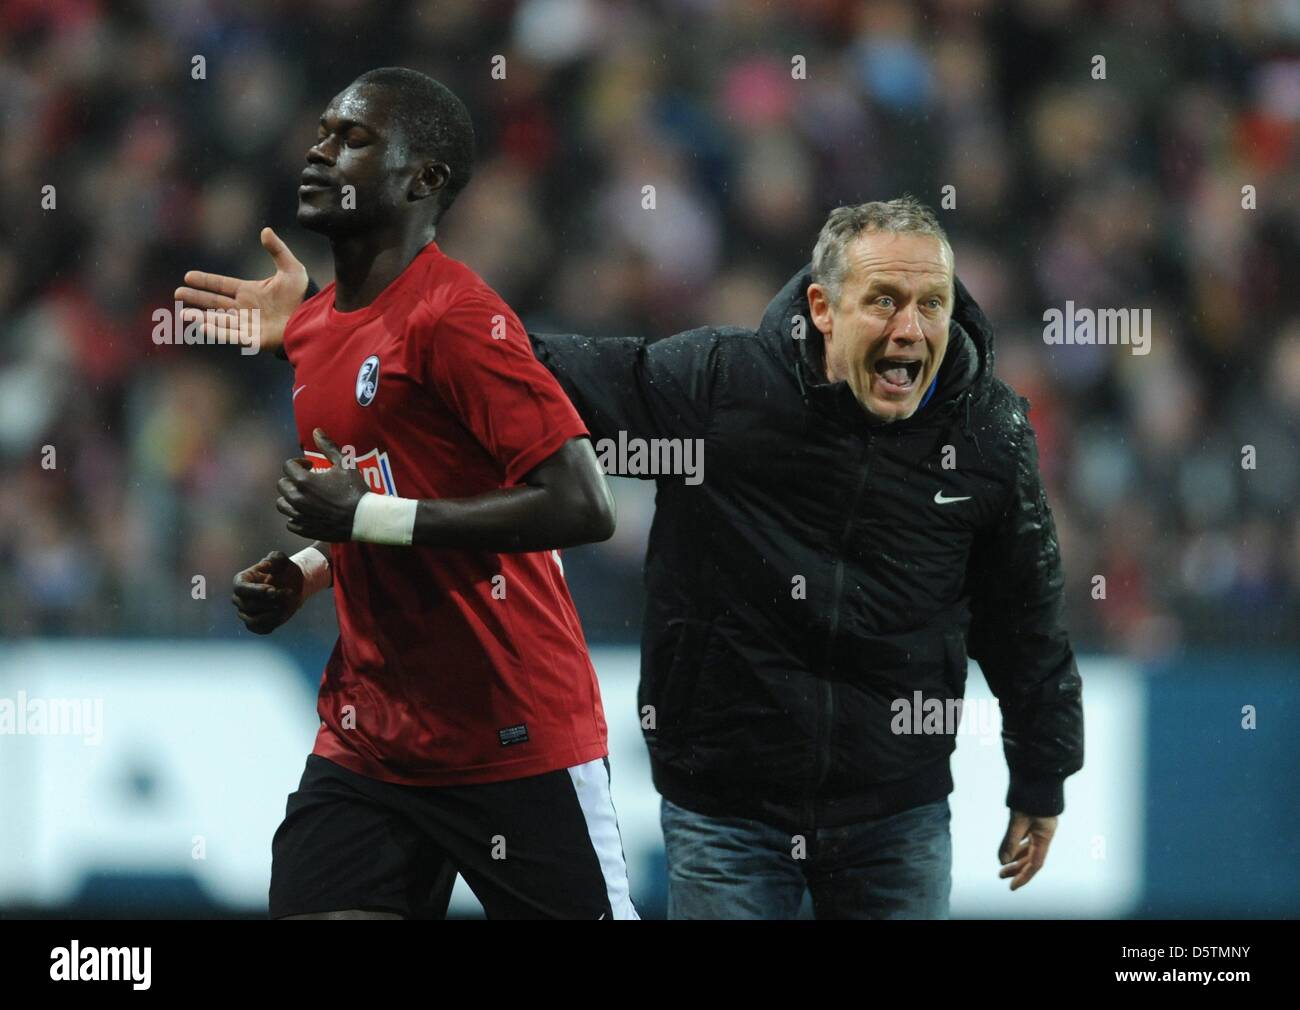 Freiburg's Daniel Caligiuri Fallou Diagne leaves the pitch after seeing the red card while his head coach Christian Streich proests during the Bundesliga soccer match between SC Freiburg and Bayern Munich at Mage Solar Stadium in Freiburg, Germany, 28 November 2012. Photo: PATRICK SEEGER  (ATTENTION: EMBARGO CONDITIONS! The DFL permits the further utilisation of up to 15 pictures o Stock Photo